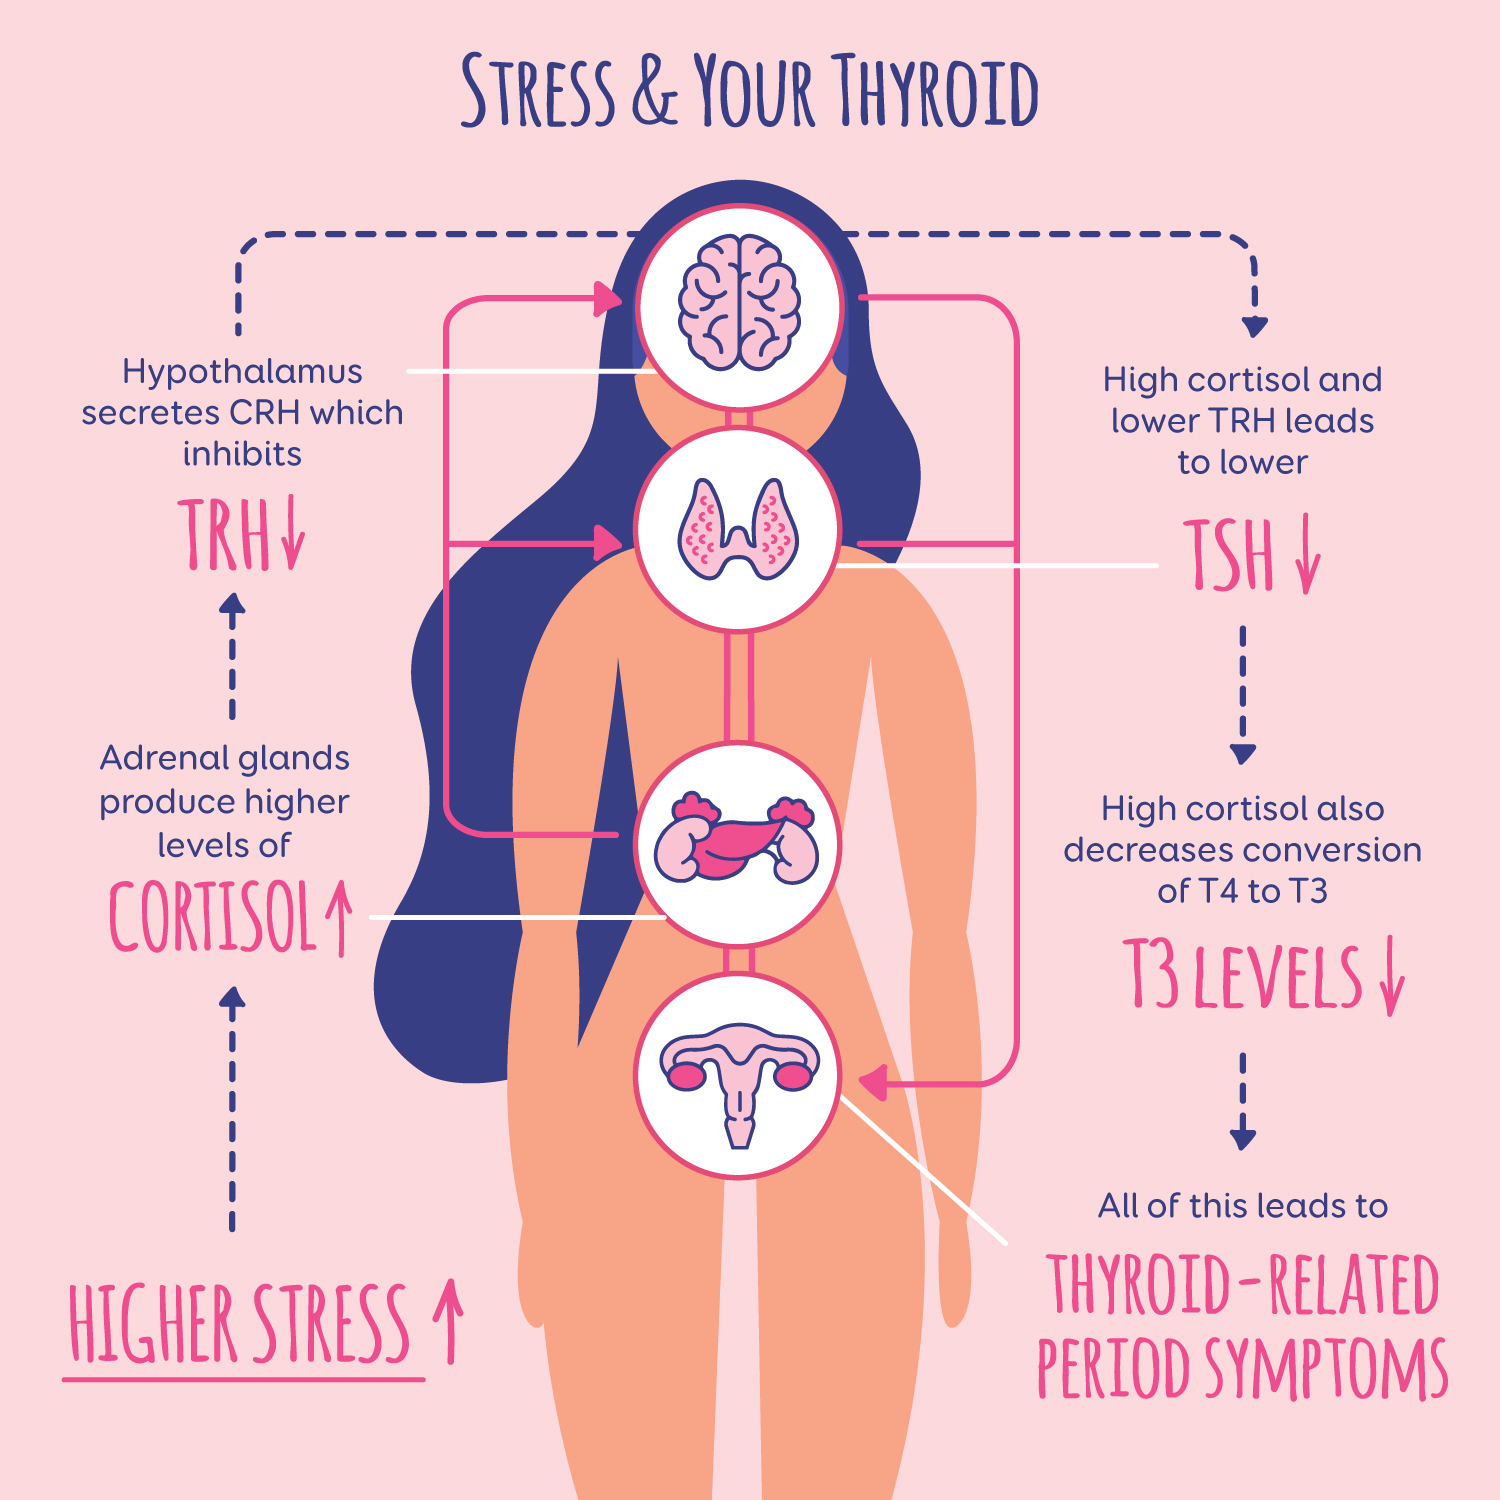 Stress and the Thyroid